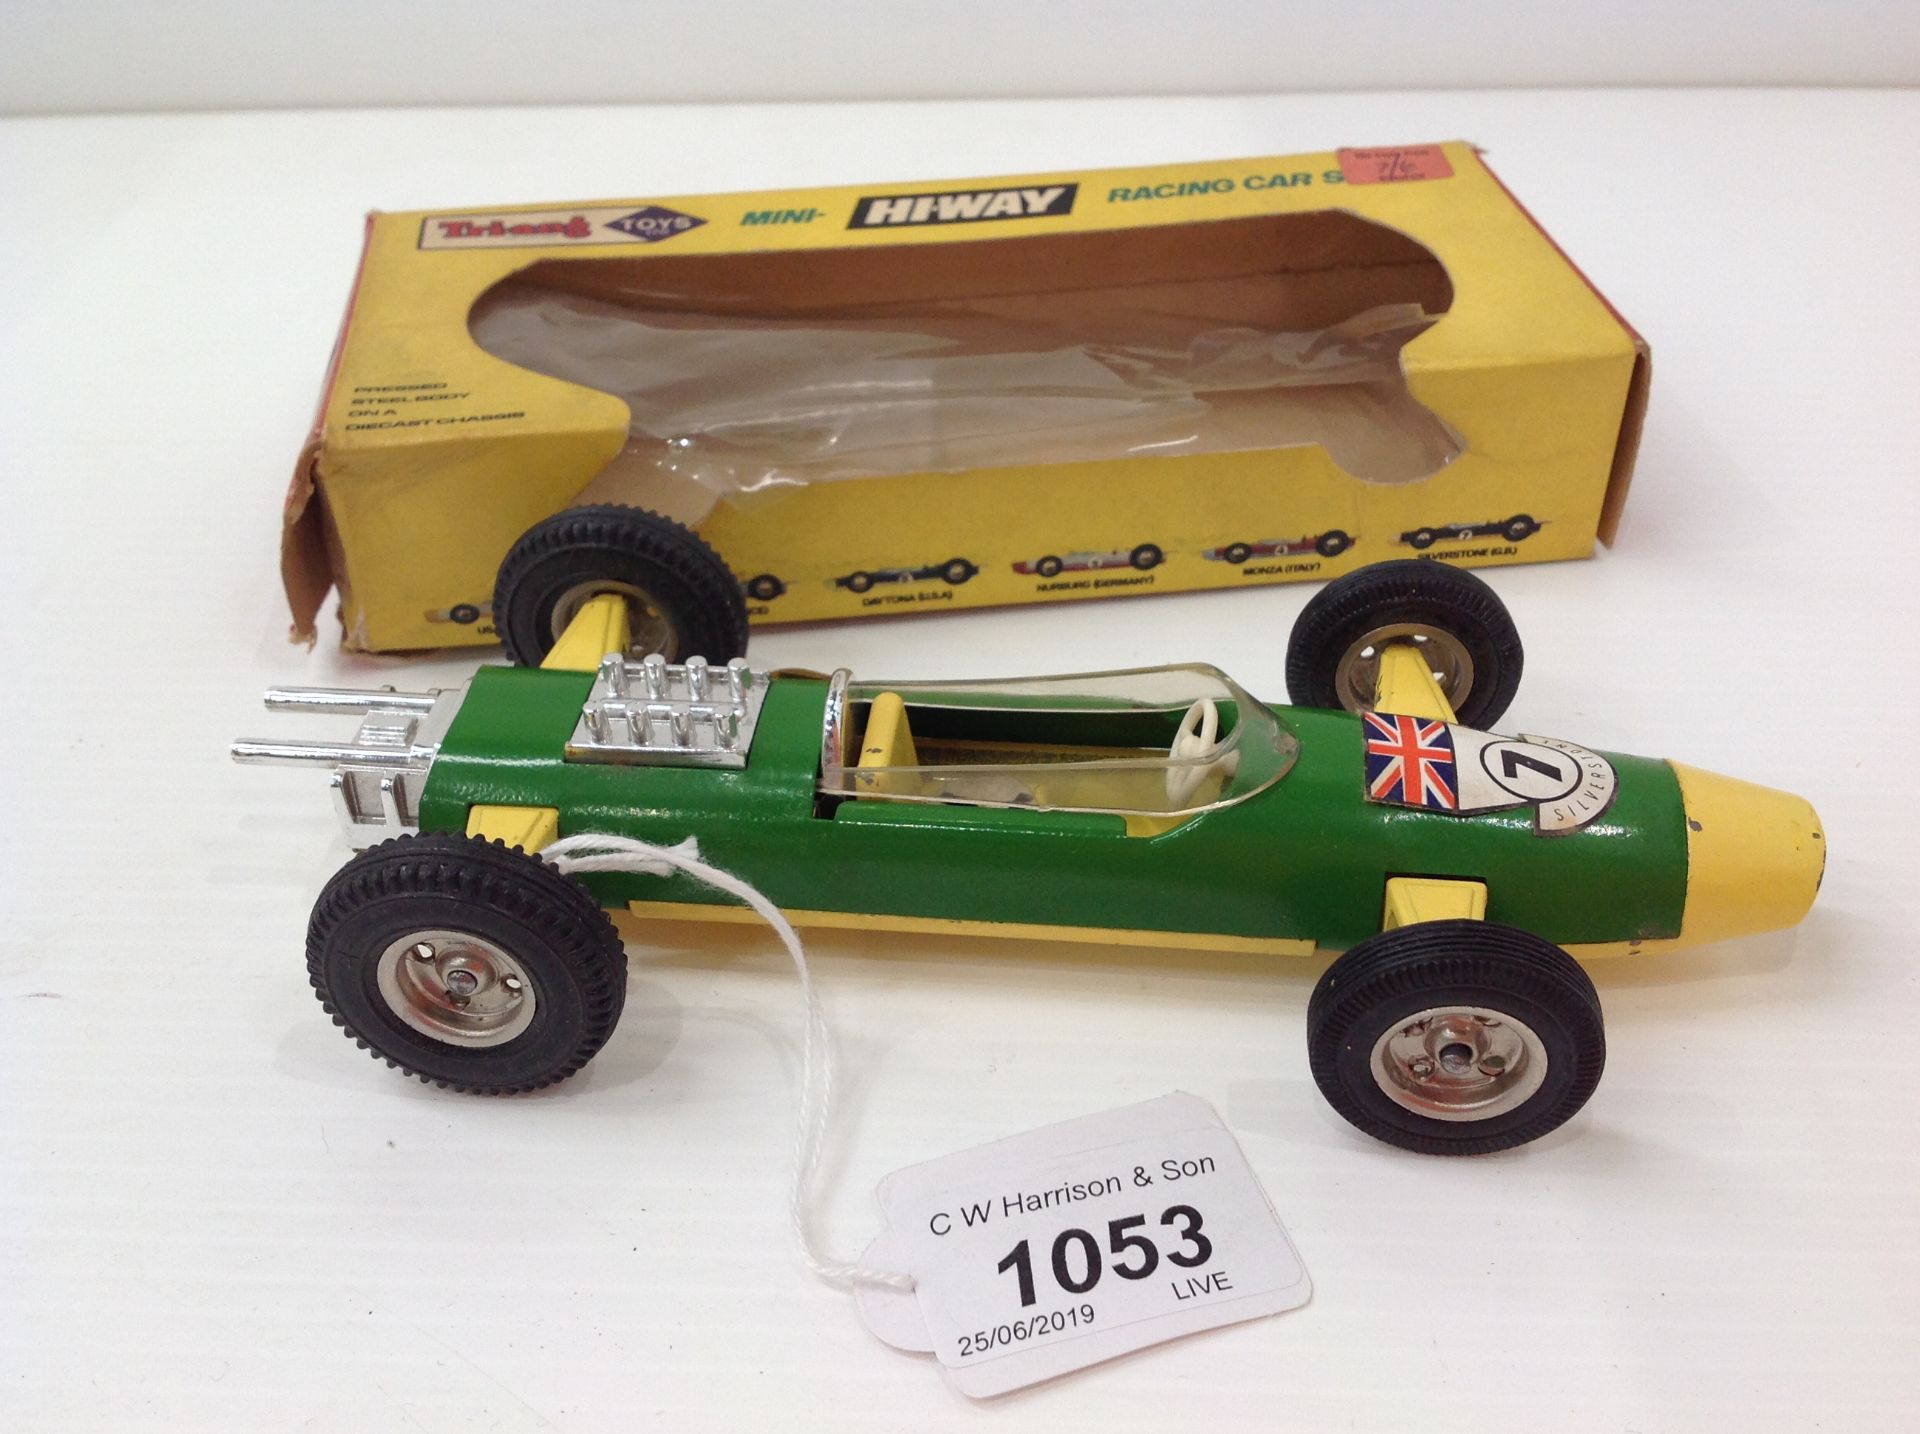 A Triang Toys Ltd Mini Hi-Way racing car 'Silverstone' - one decal loose but on seat of car - boxed